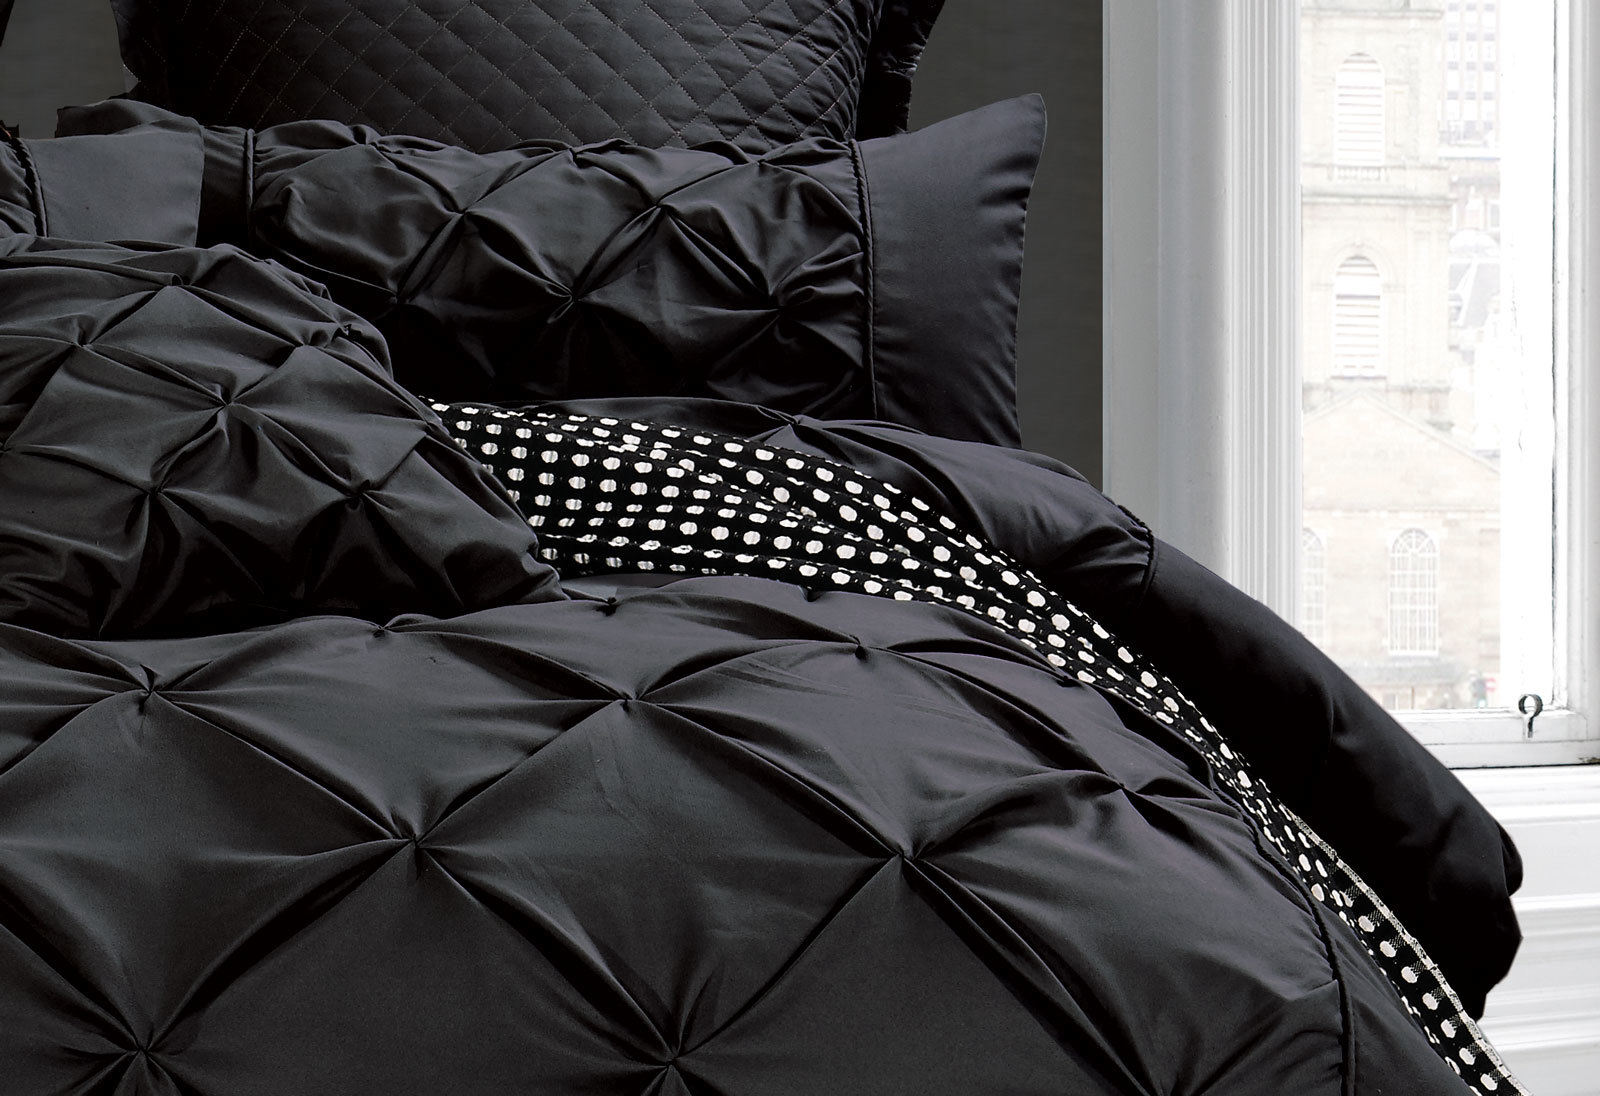 Luxton Diamond Cross Black Quilt Cover Set In Super King Queen Size